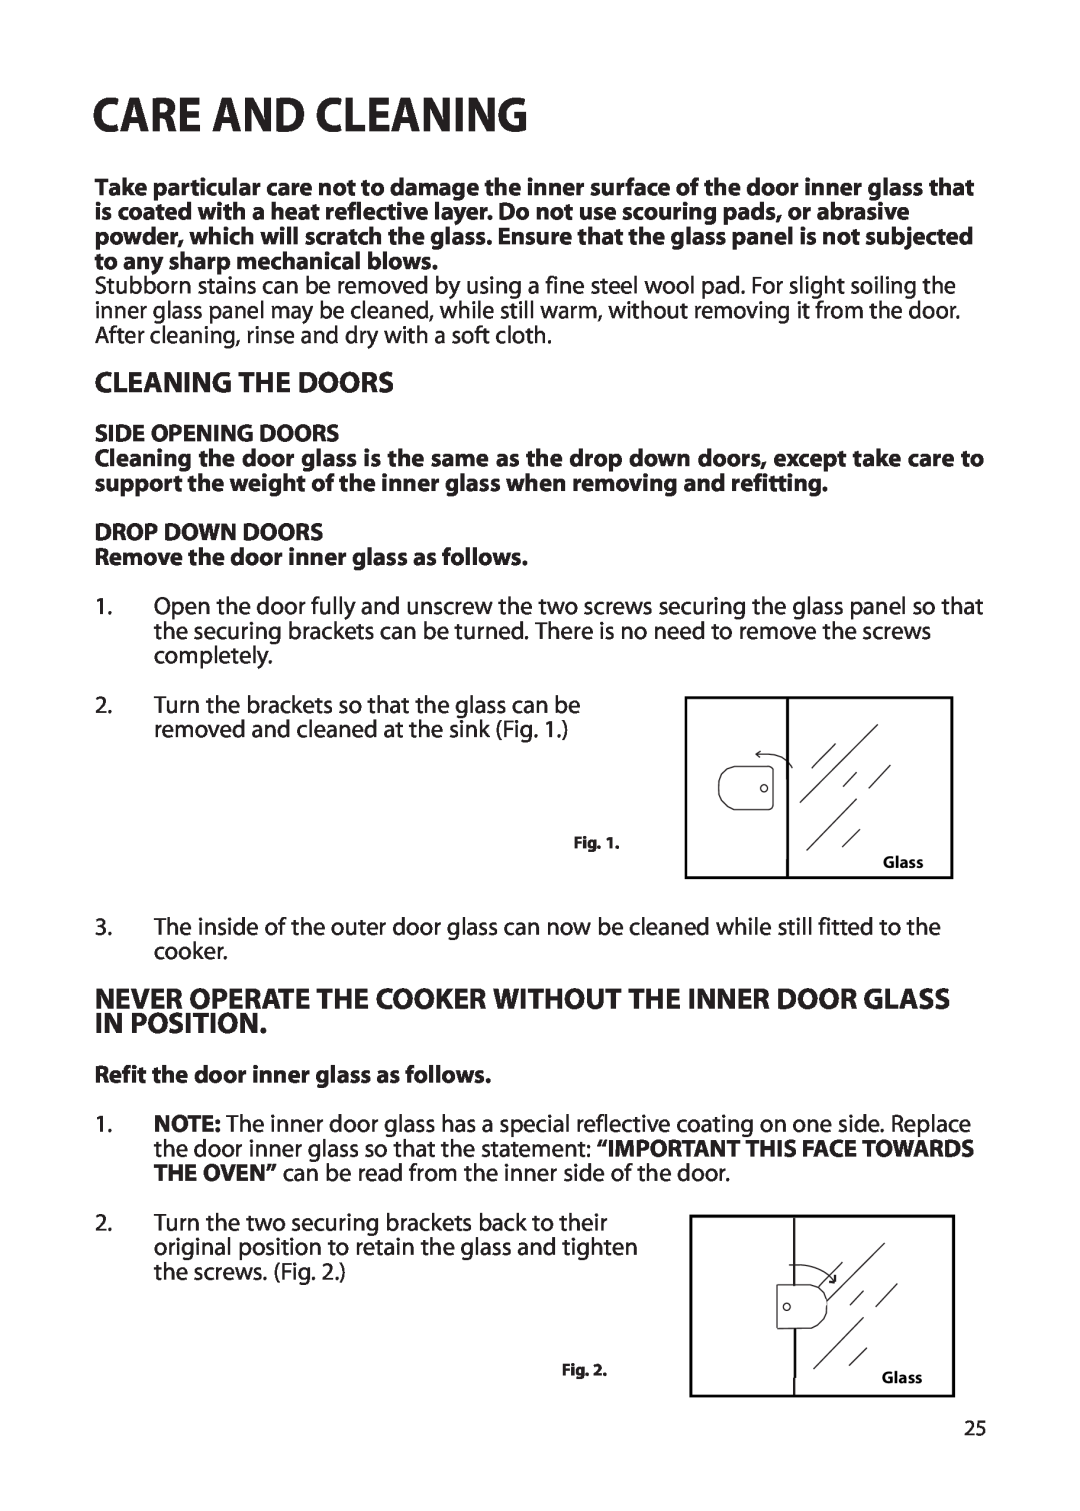 Creda S230G installation instructions Care And Cleaning, Cleaning The Doors 